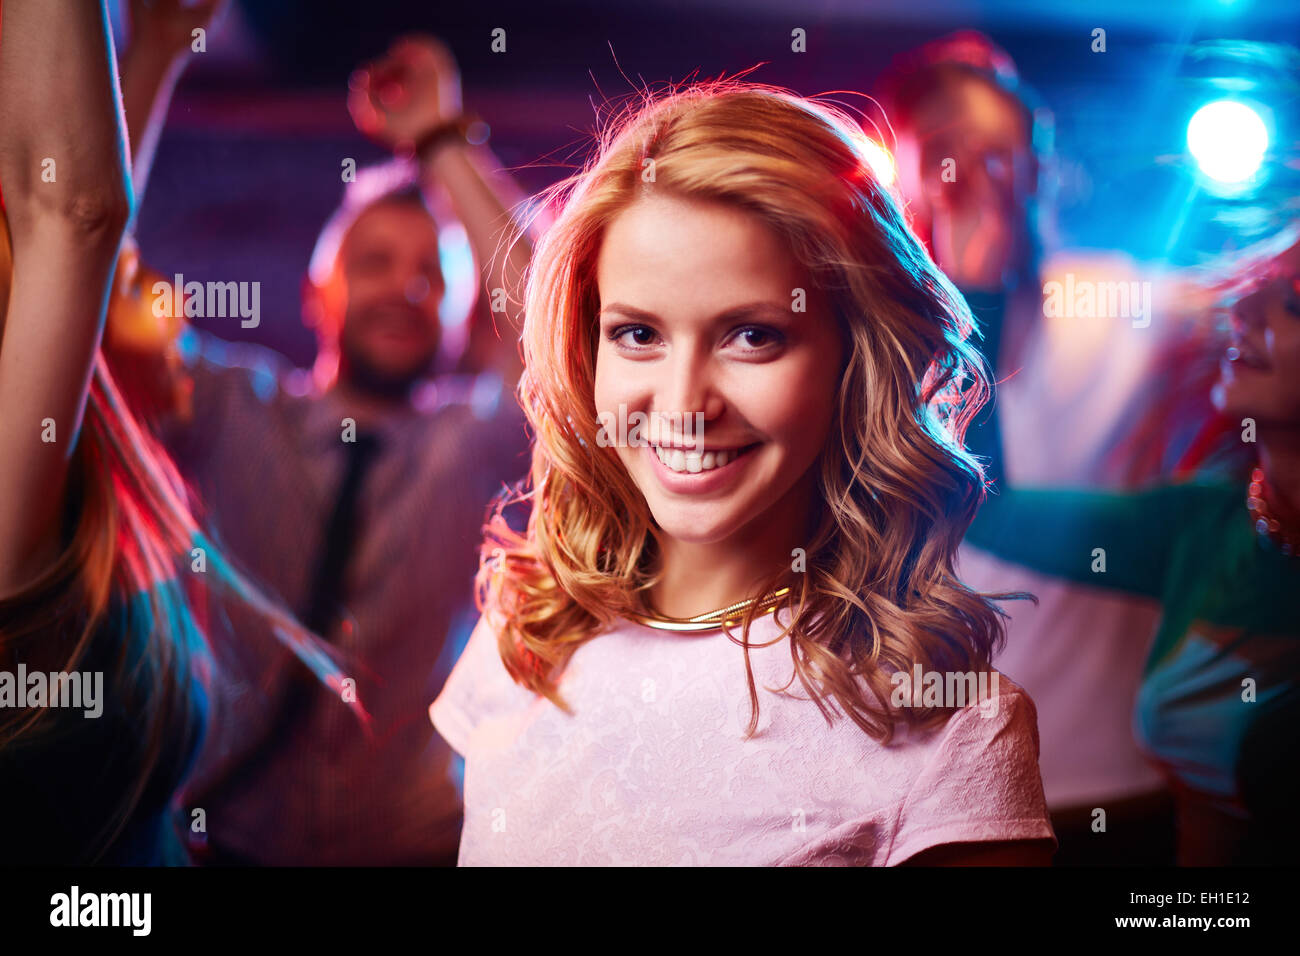 Portrait of young woman in nightclub Banque D'Images